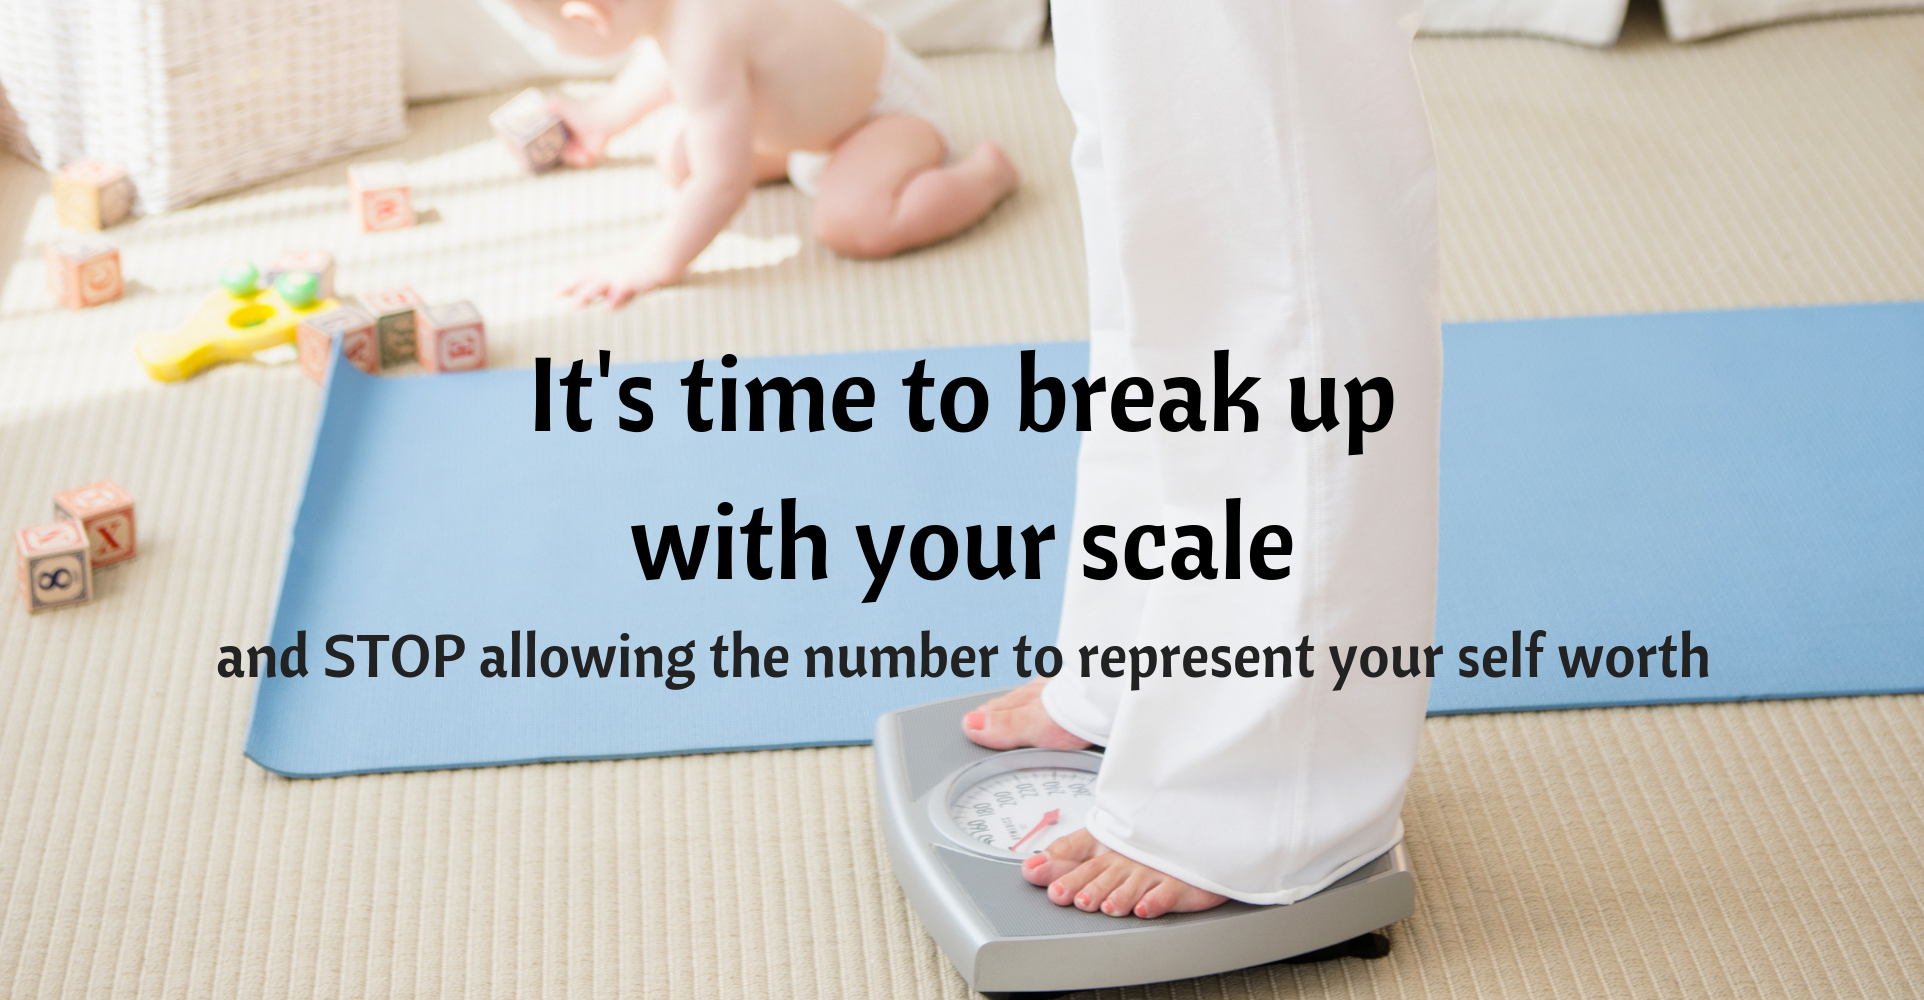 It's time to break up with your scale